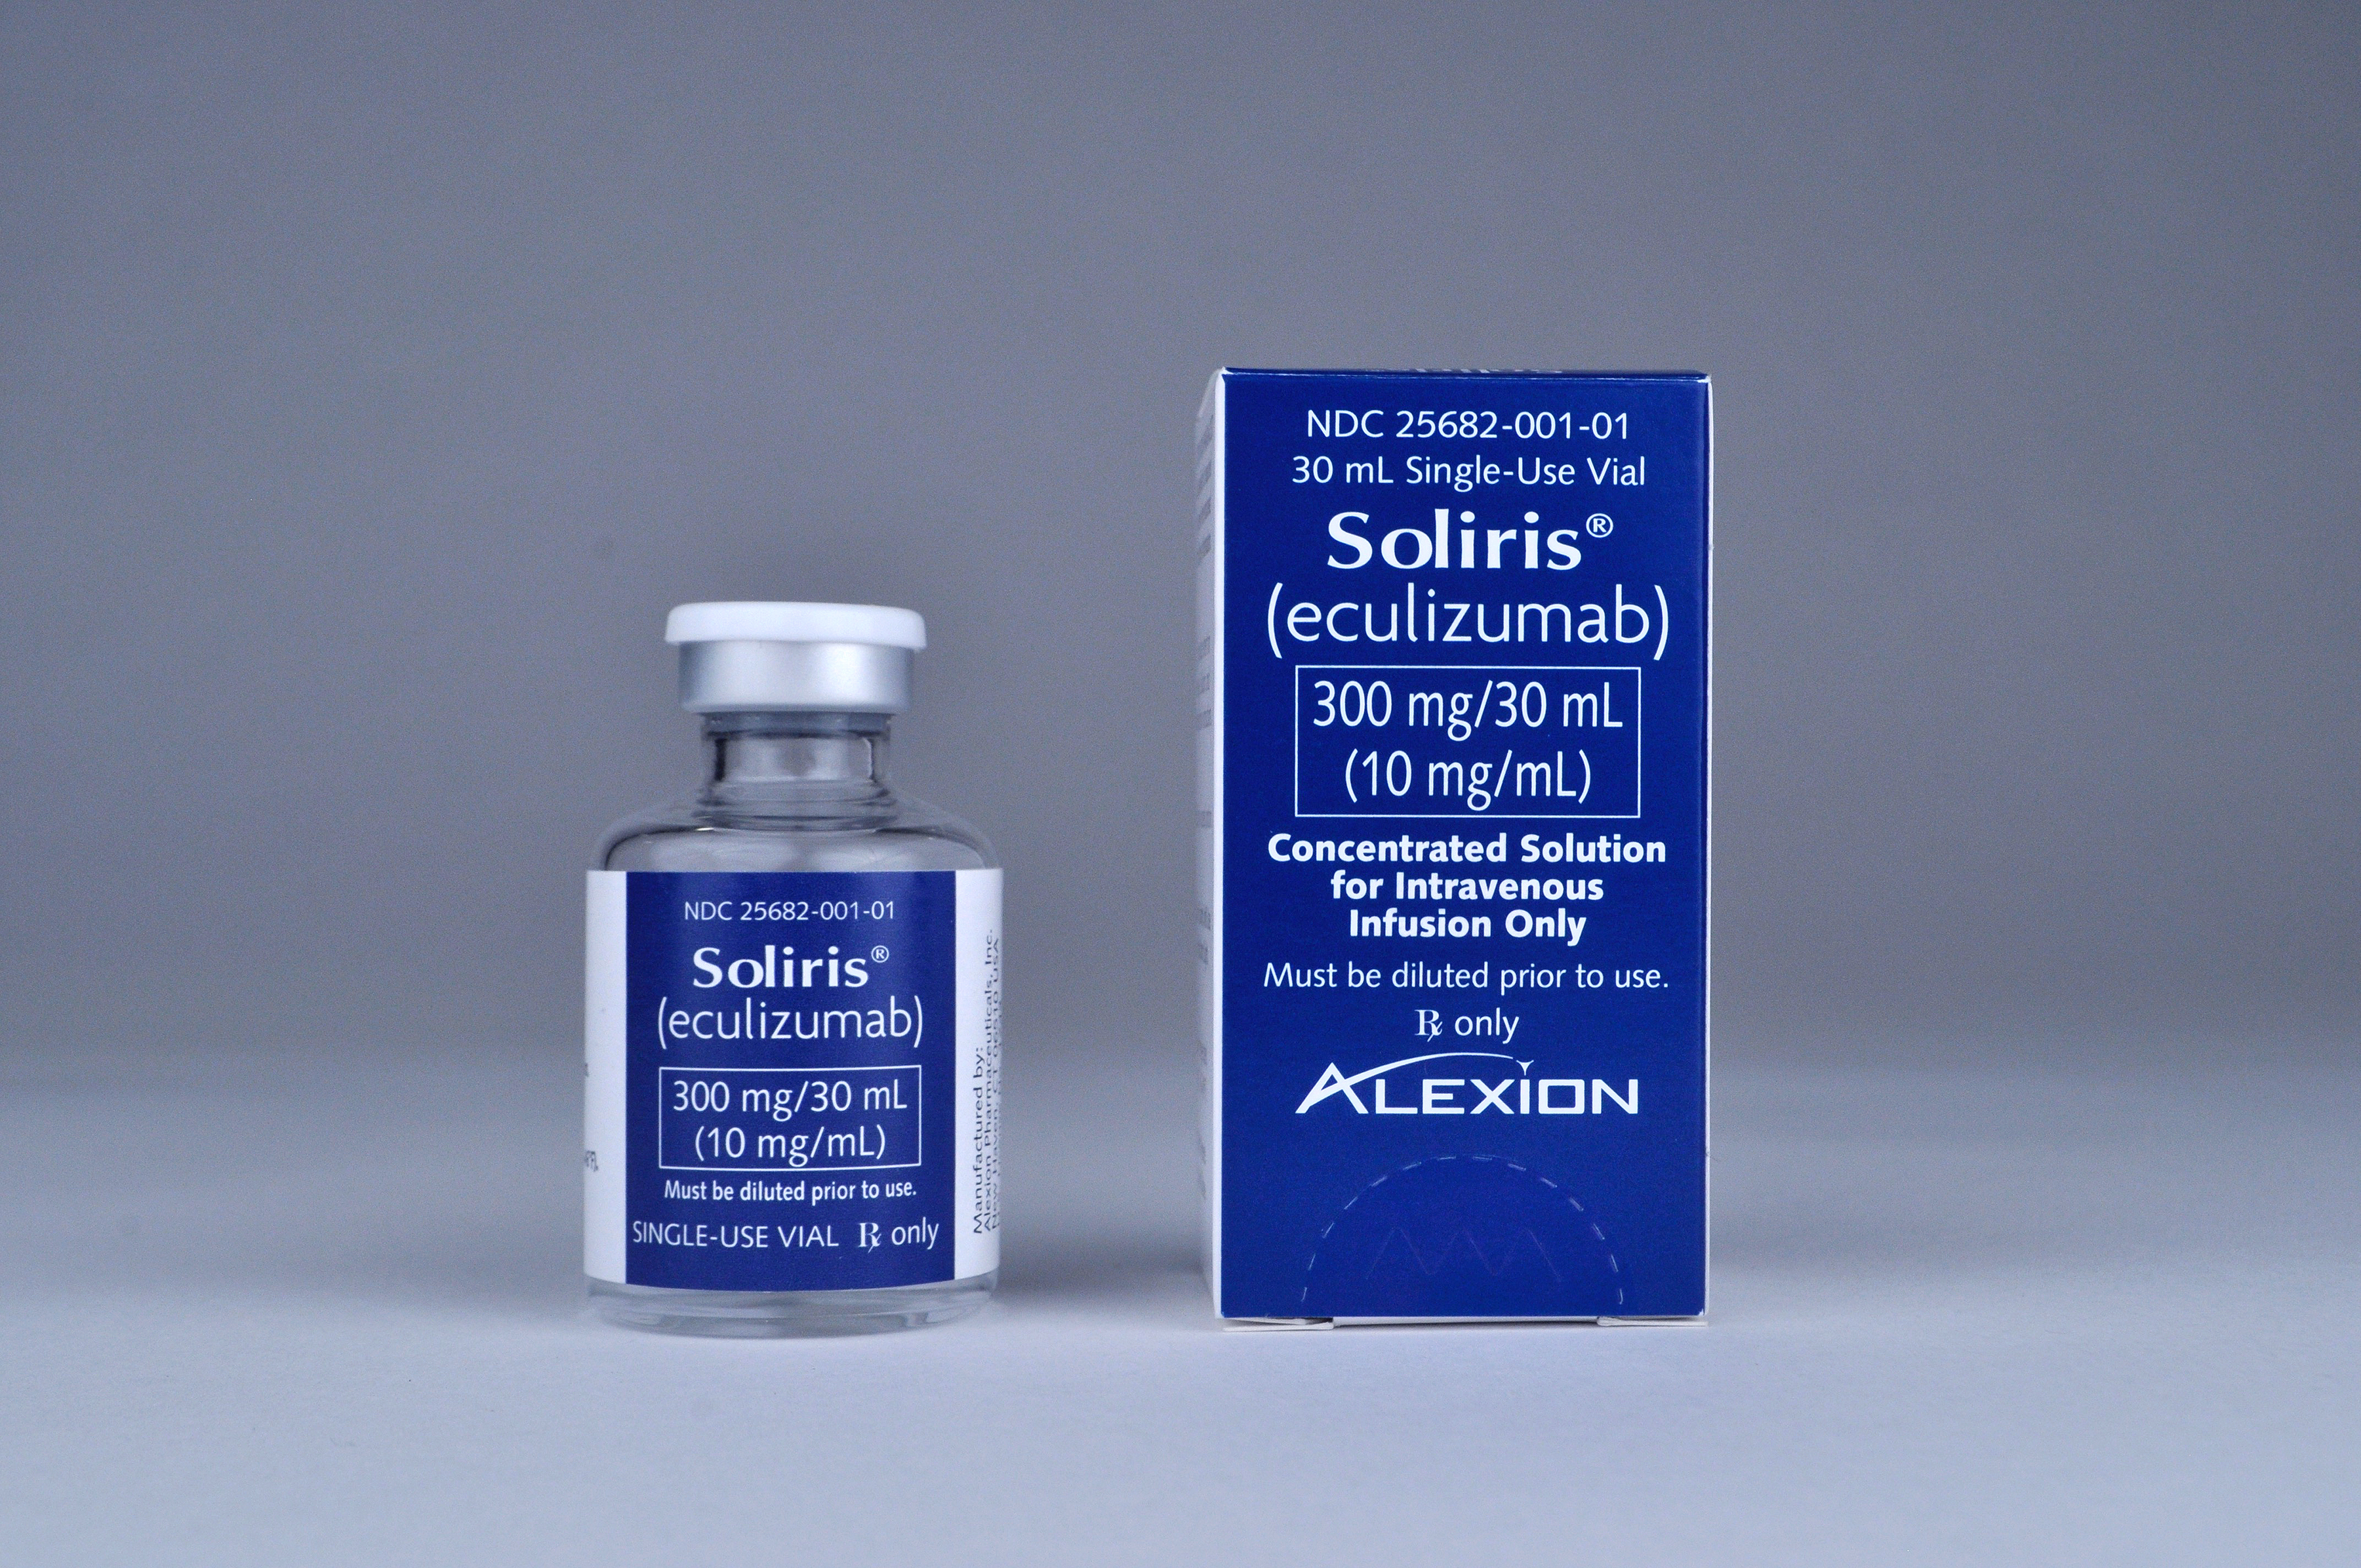 ADDING MULTIMEDIA Alexion Receives FDA Approval of SOLIRIS® (eculizumab)  for the Treatment of Adults with Neuromyelitis Optica Spectrum Disorder  (NMOSD) who are Anti-Aquaporin-4 (AQP4) Antibody Positive | Business Wire